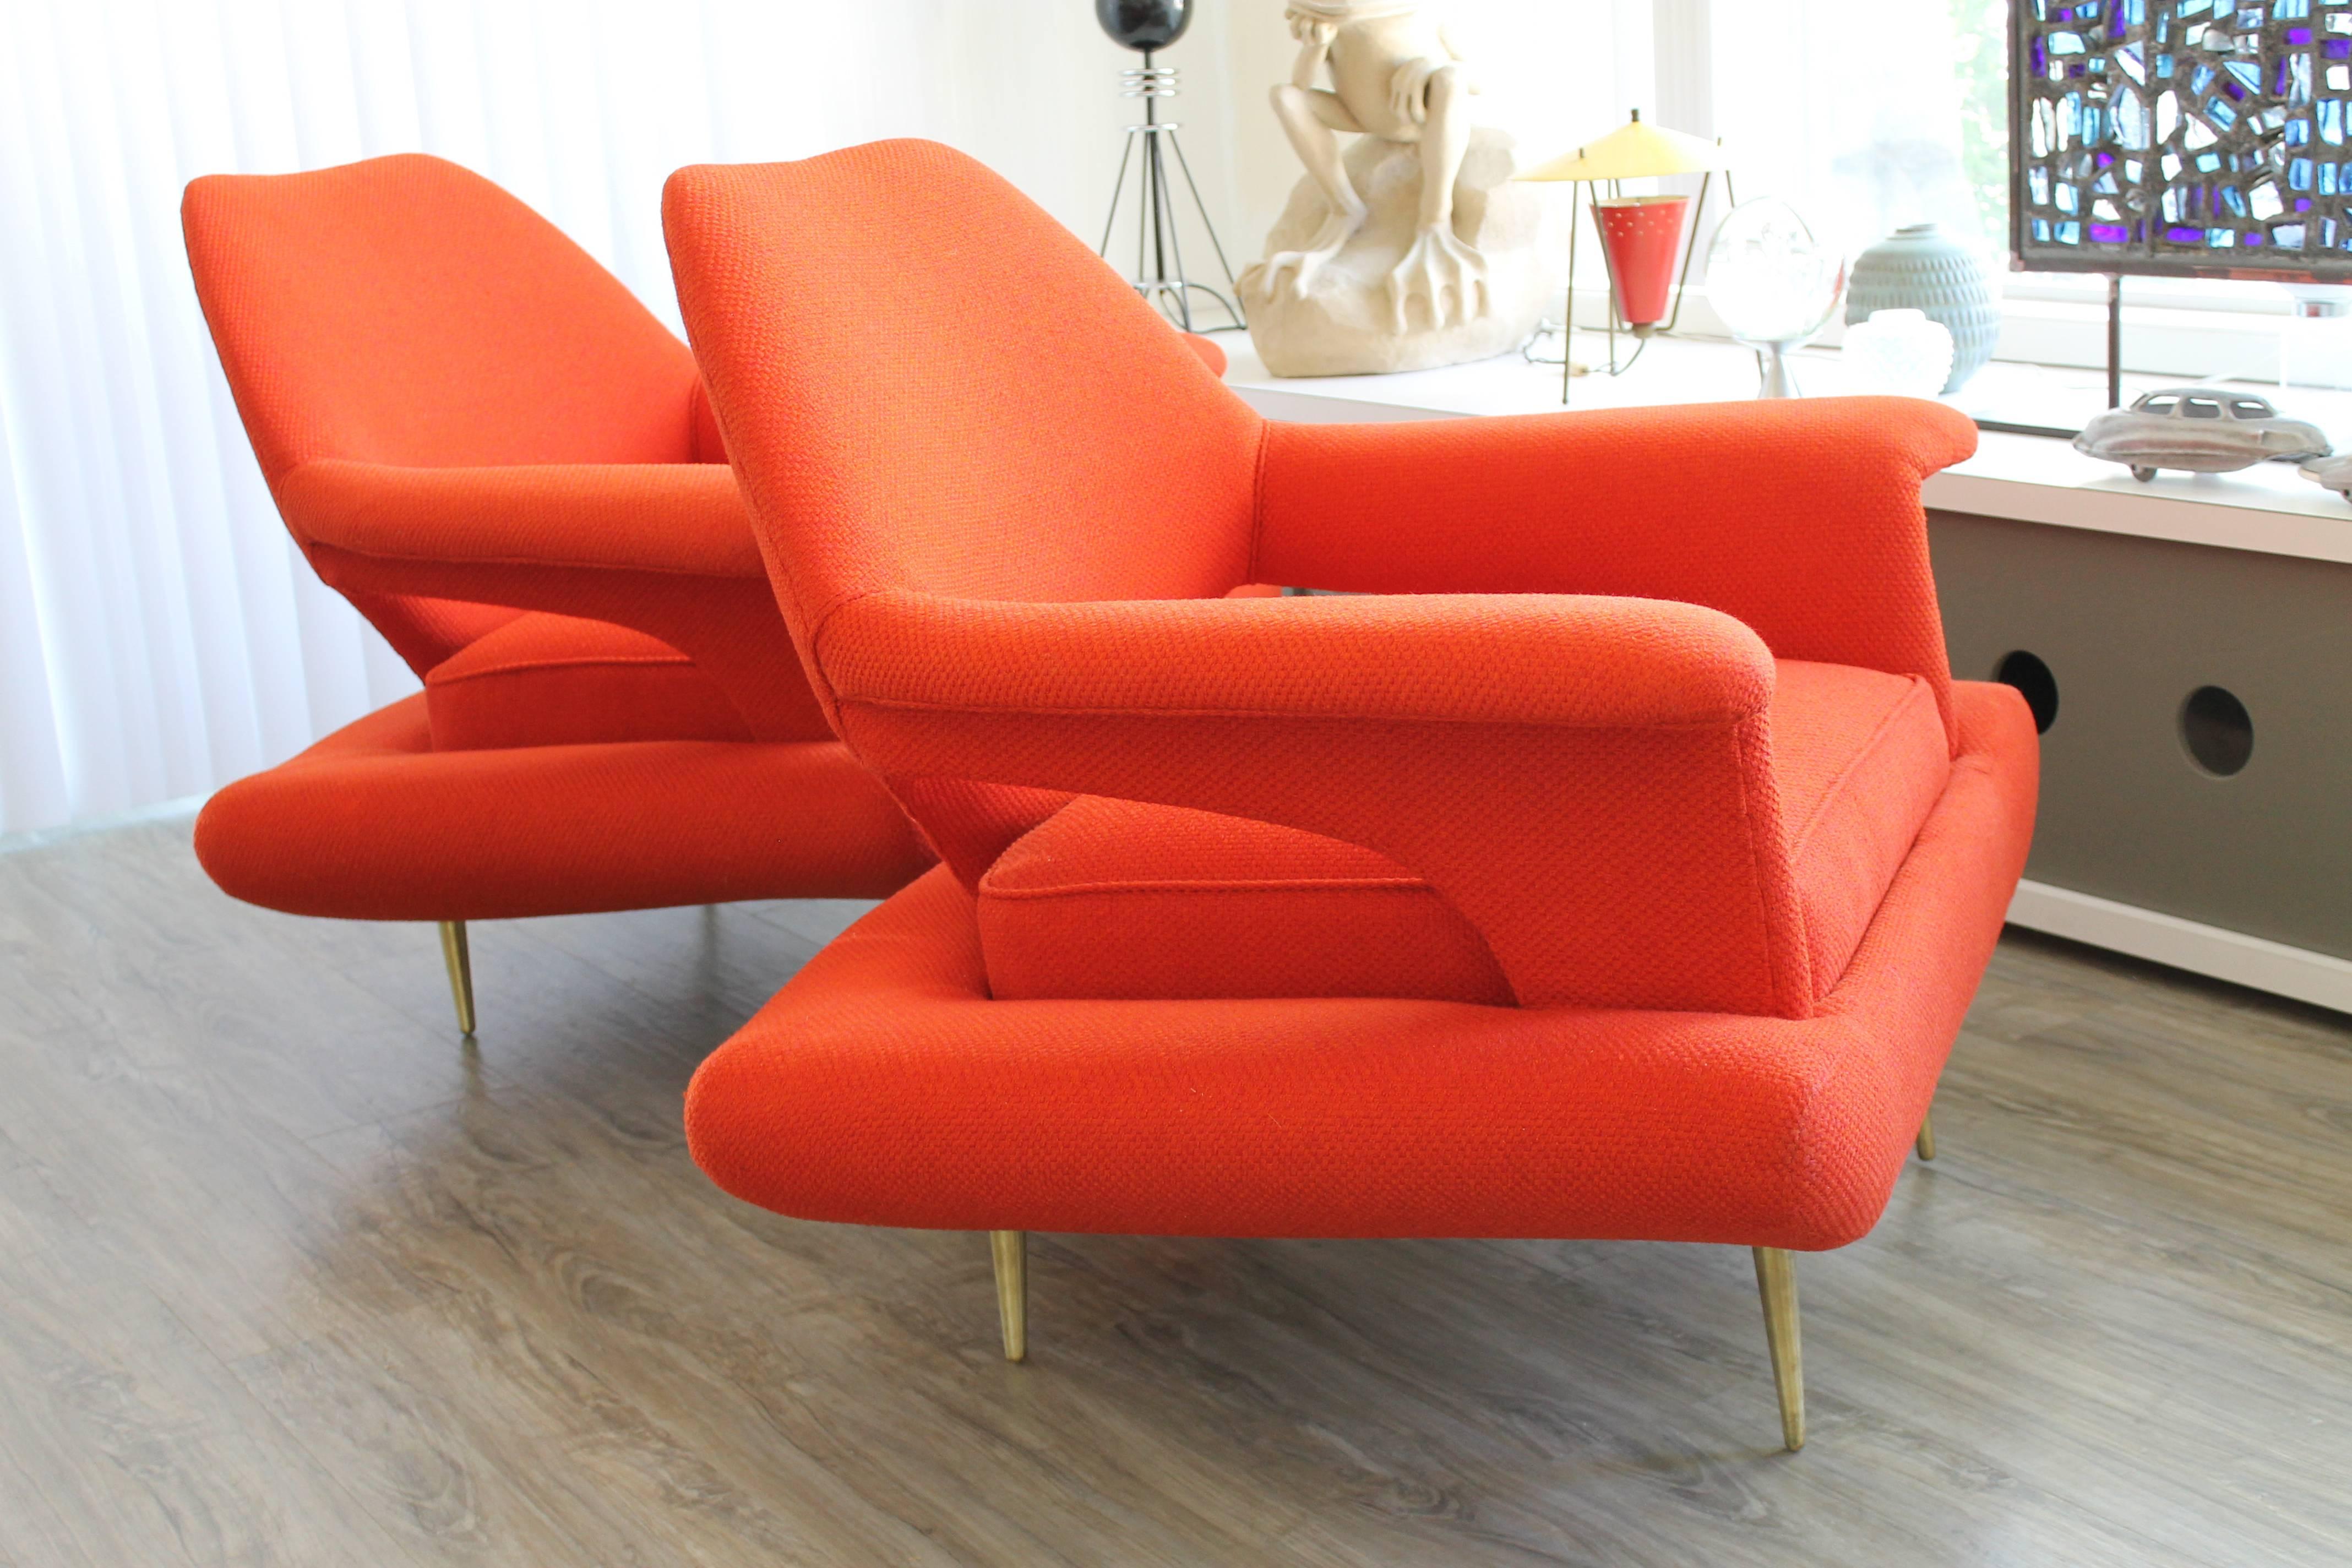 A stunning pair of highly sculptural chairs with solid brass tapered legs. Recently reupholstered. Color is a reddish orange. We believe these to be of European origin and design, most likely Italian. Possibly by Gastone Rinaldi. They are